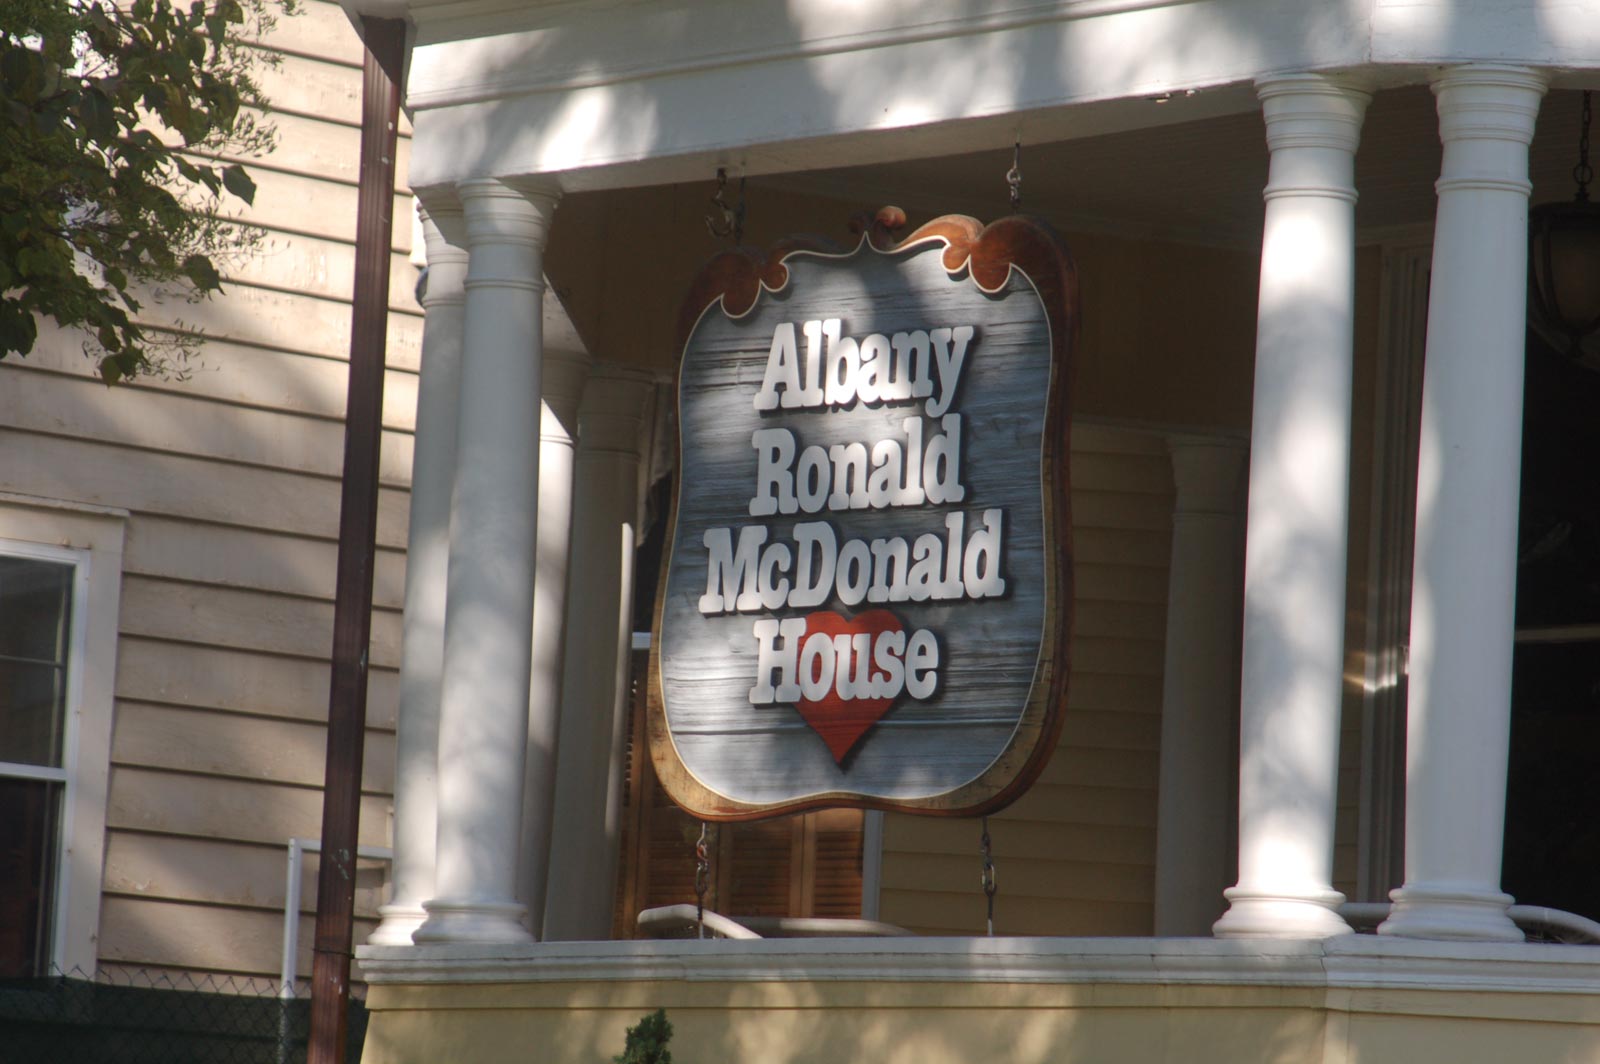 Close up of the Albany Ronald McDonald House sign